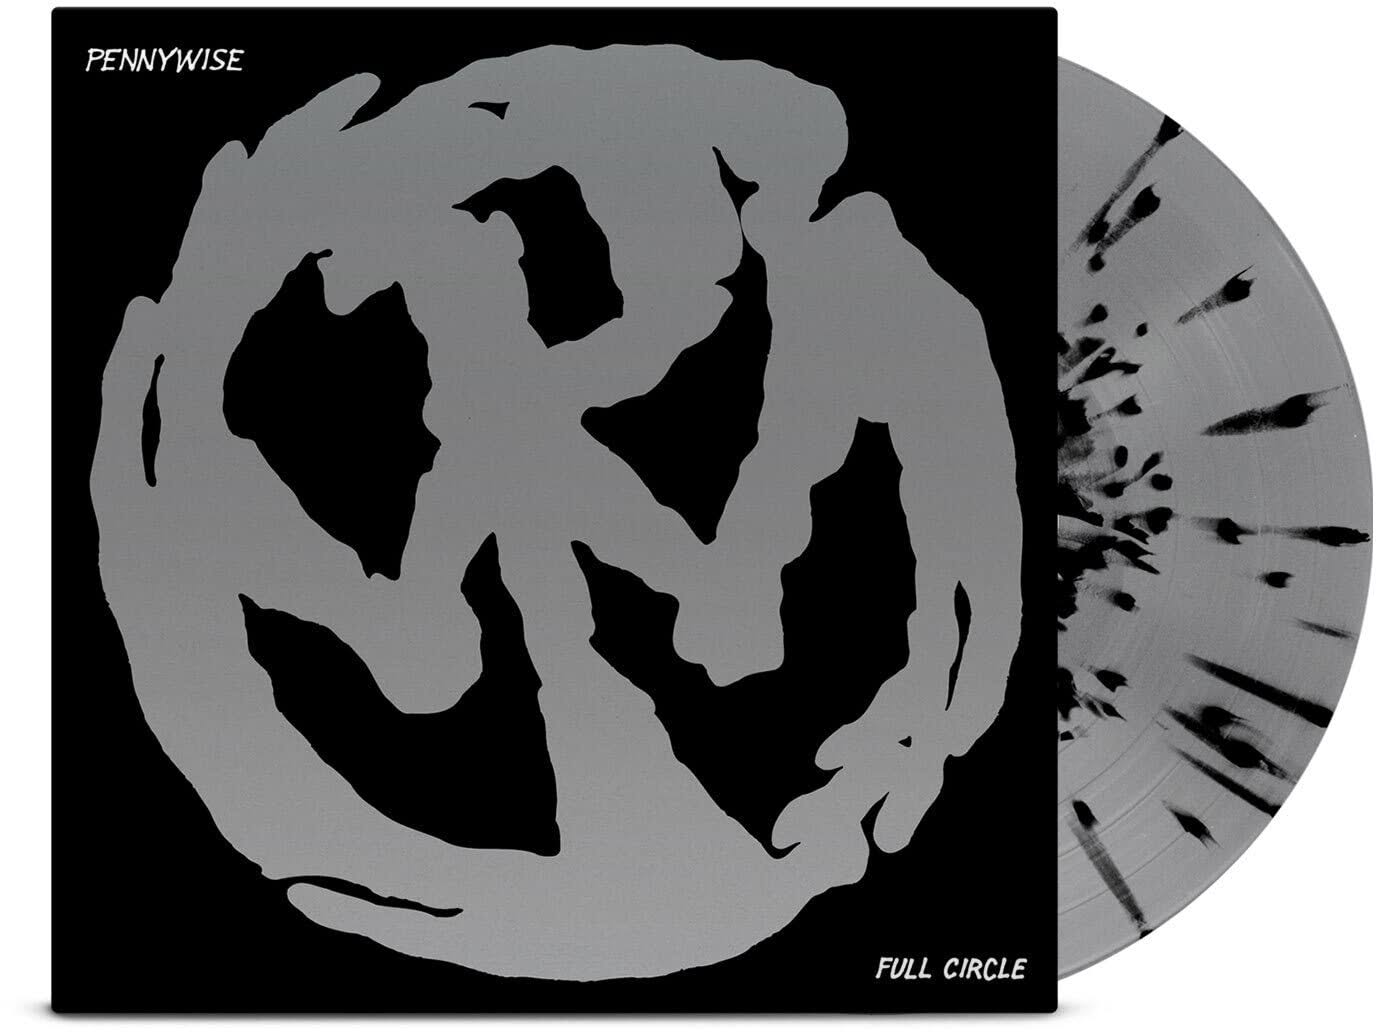 Pennywise - Full Circle - Anniversary Edition (Colored Vinyl, Silver & Black Splatter)